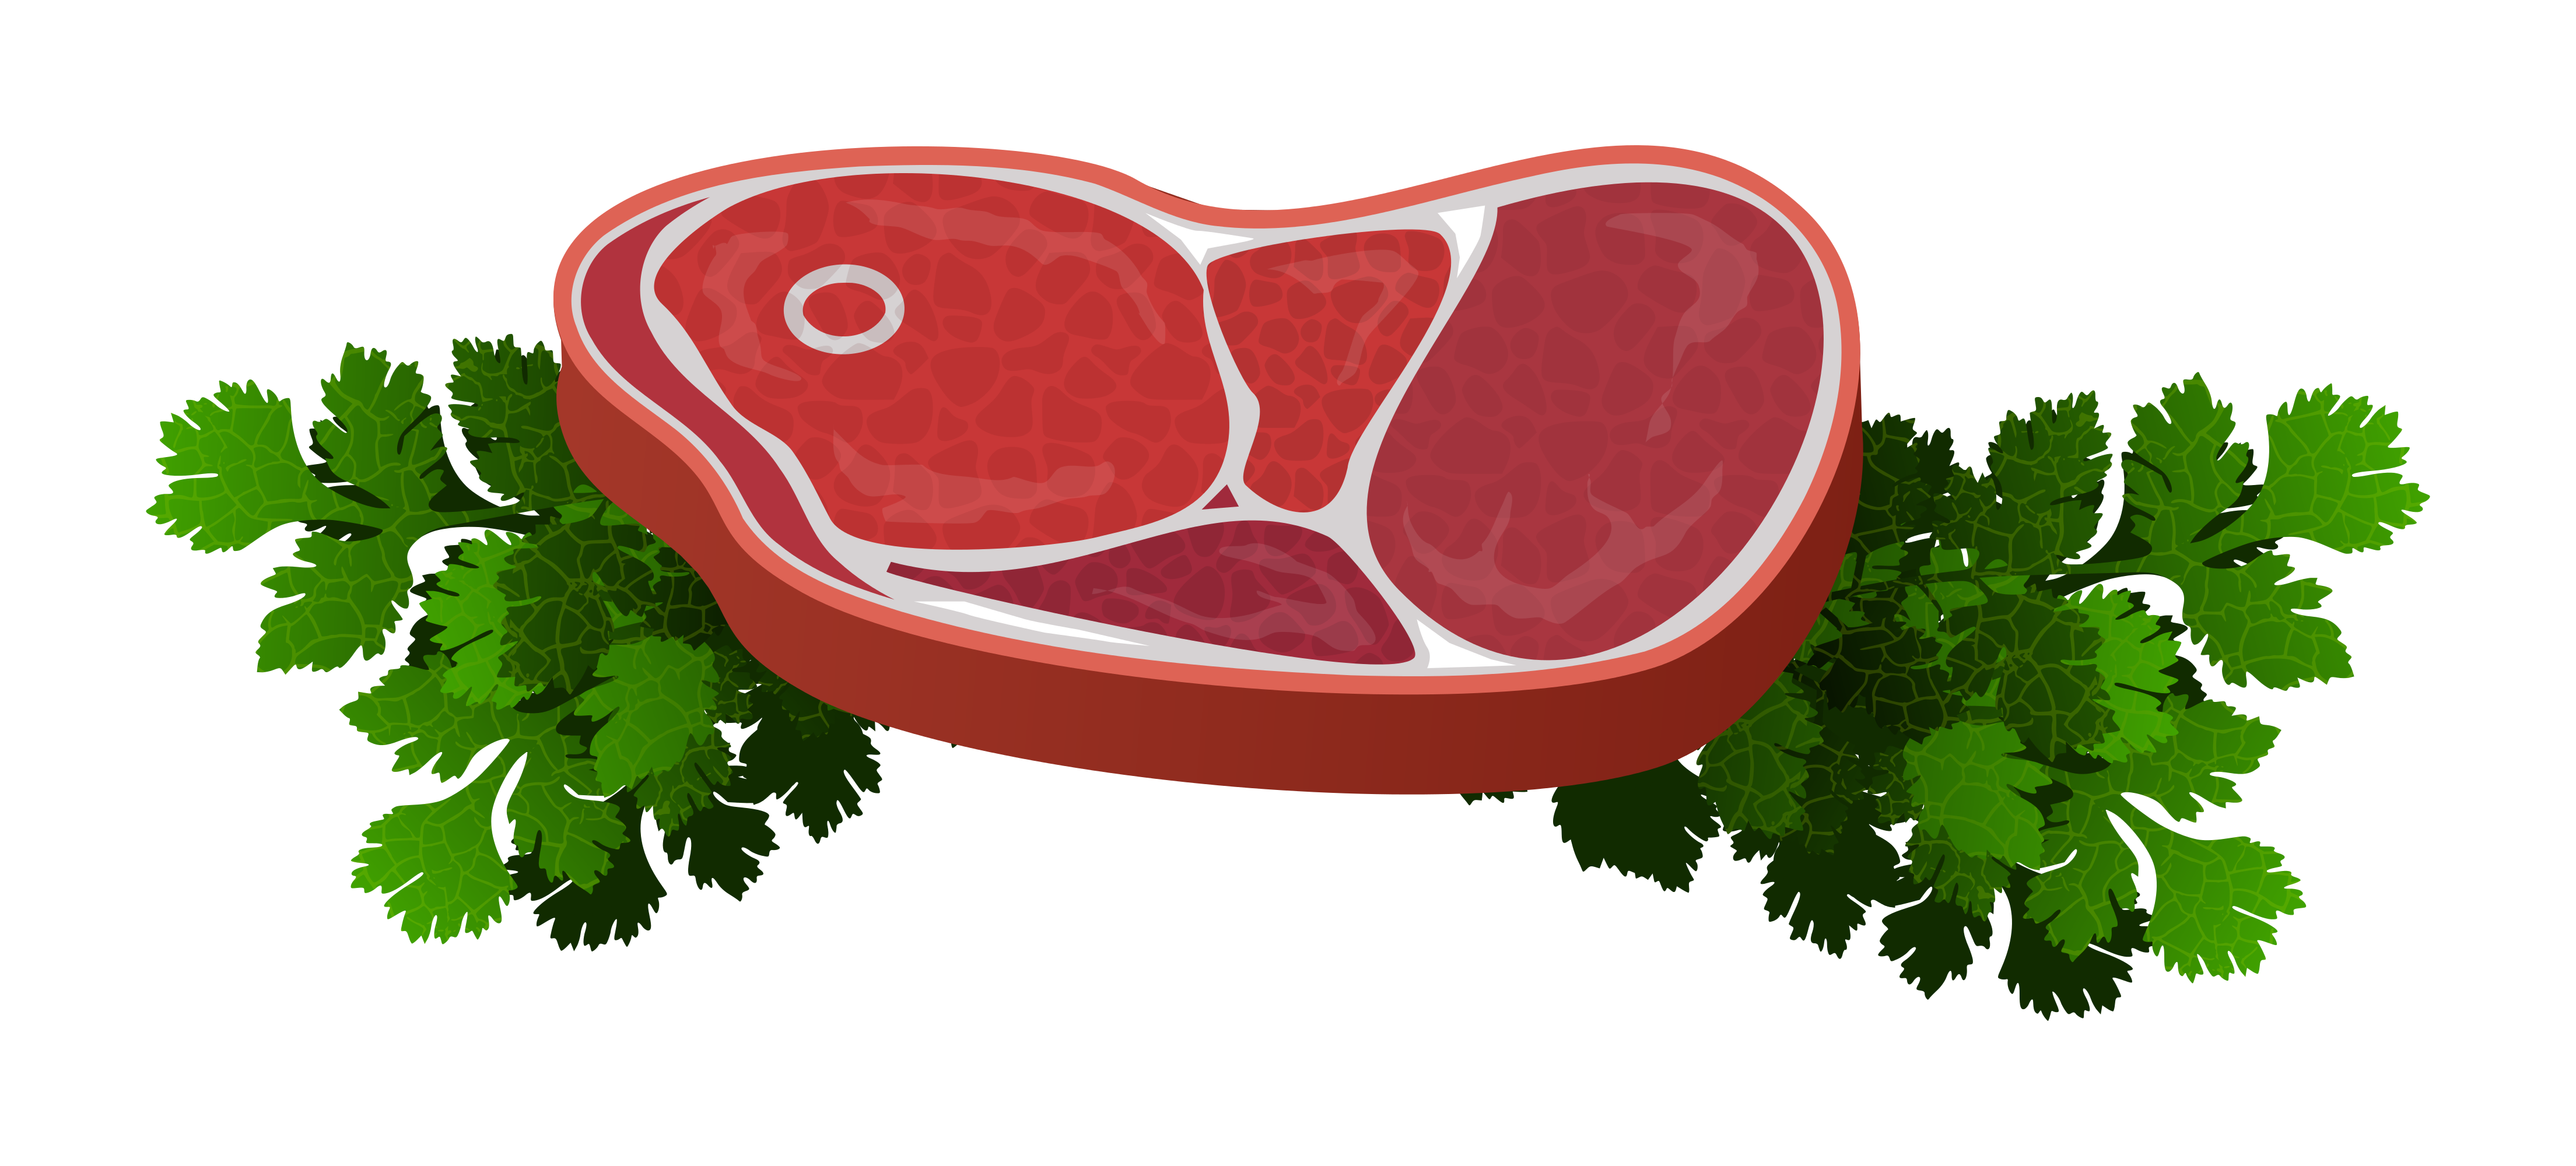 Beef clipart steak food. Raw x everyday foods